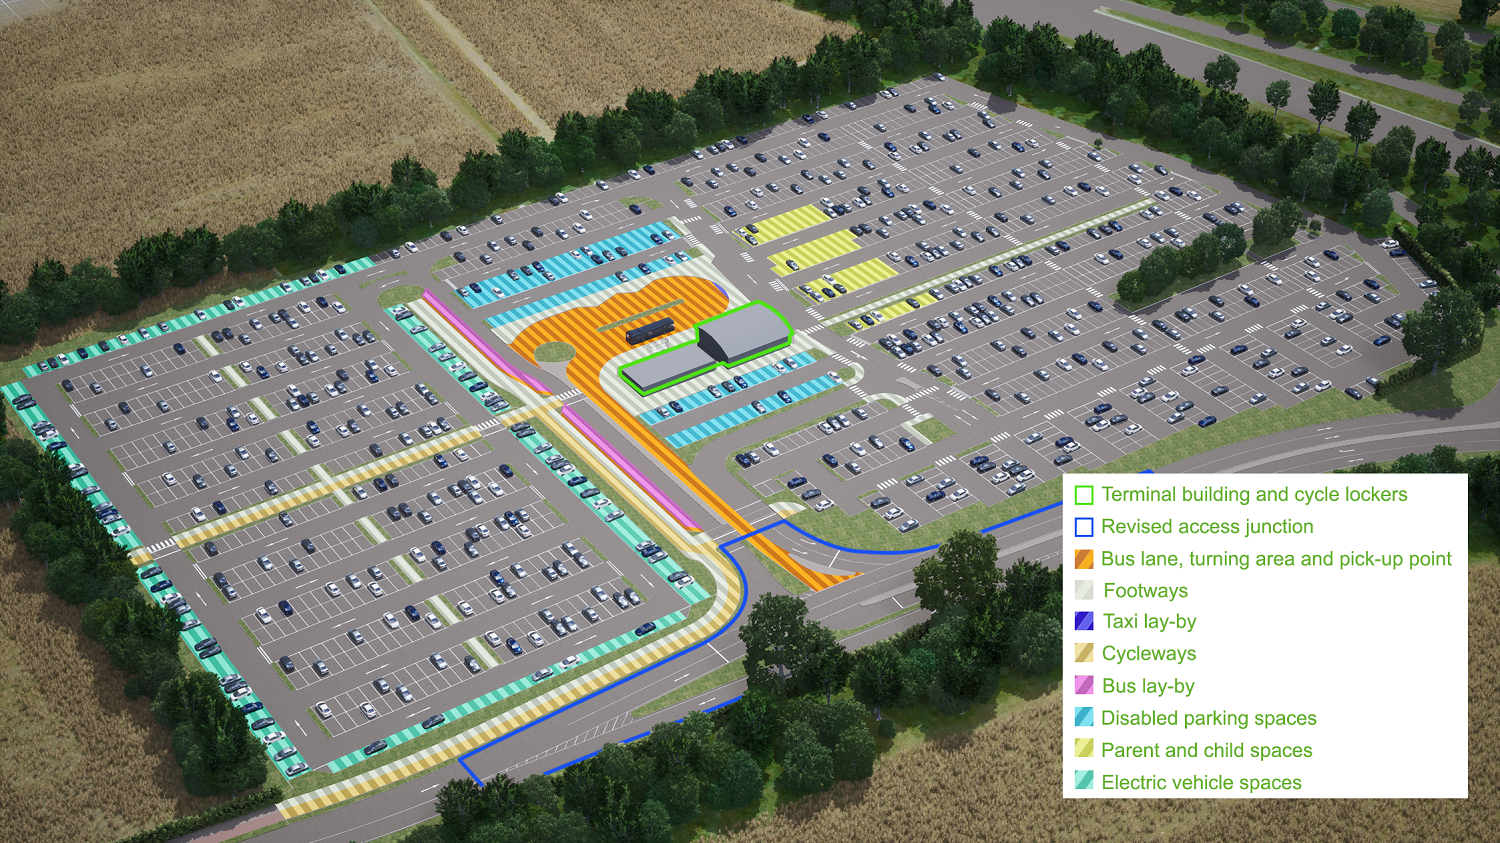 Image showing the proposed extended Sandon Park and Ride site and layout changes with a key